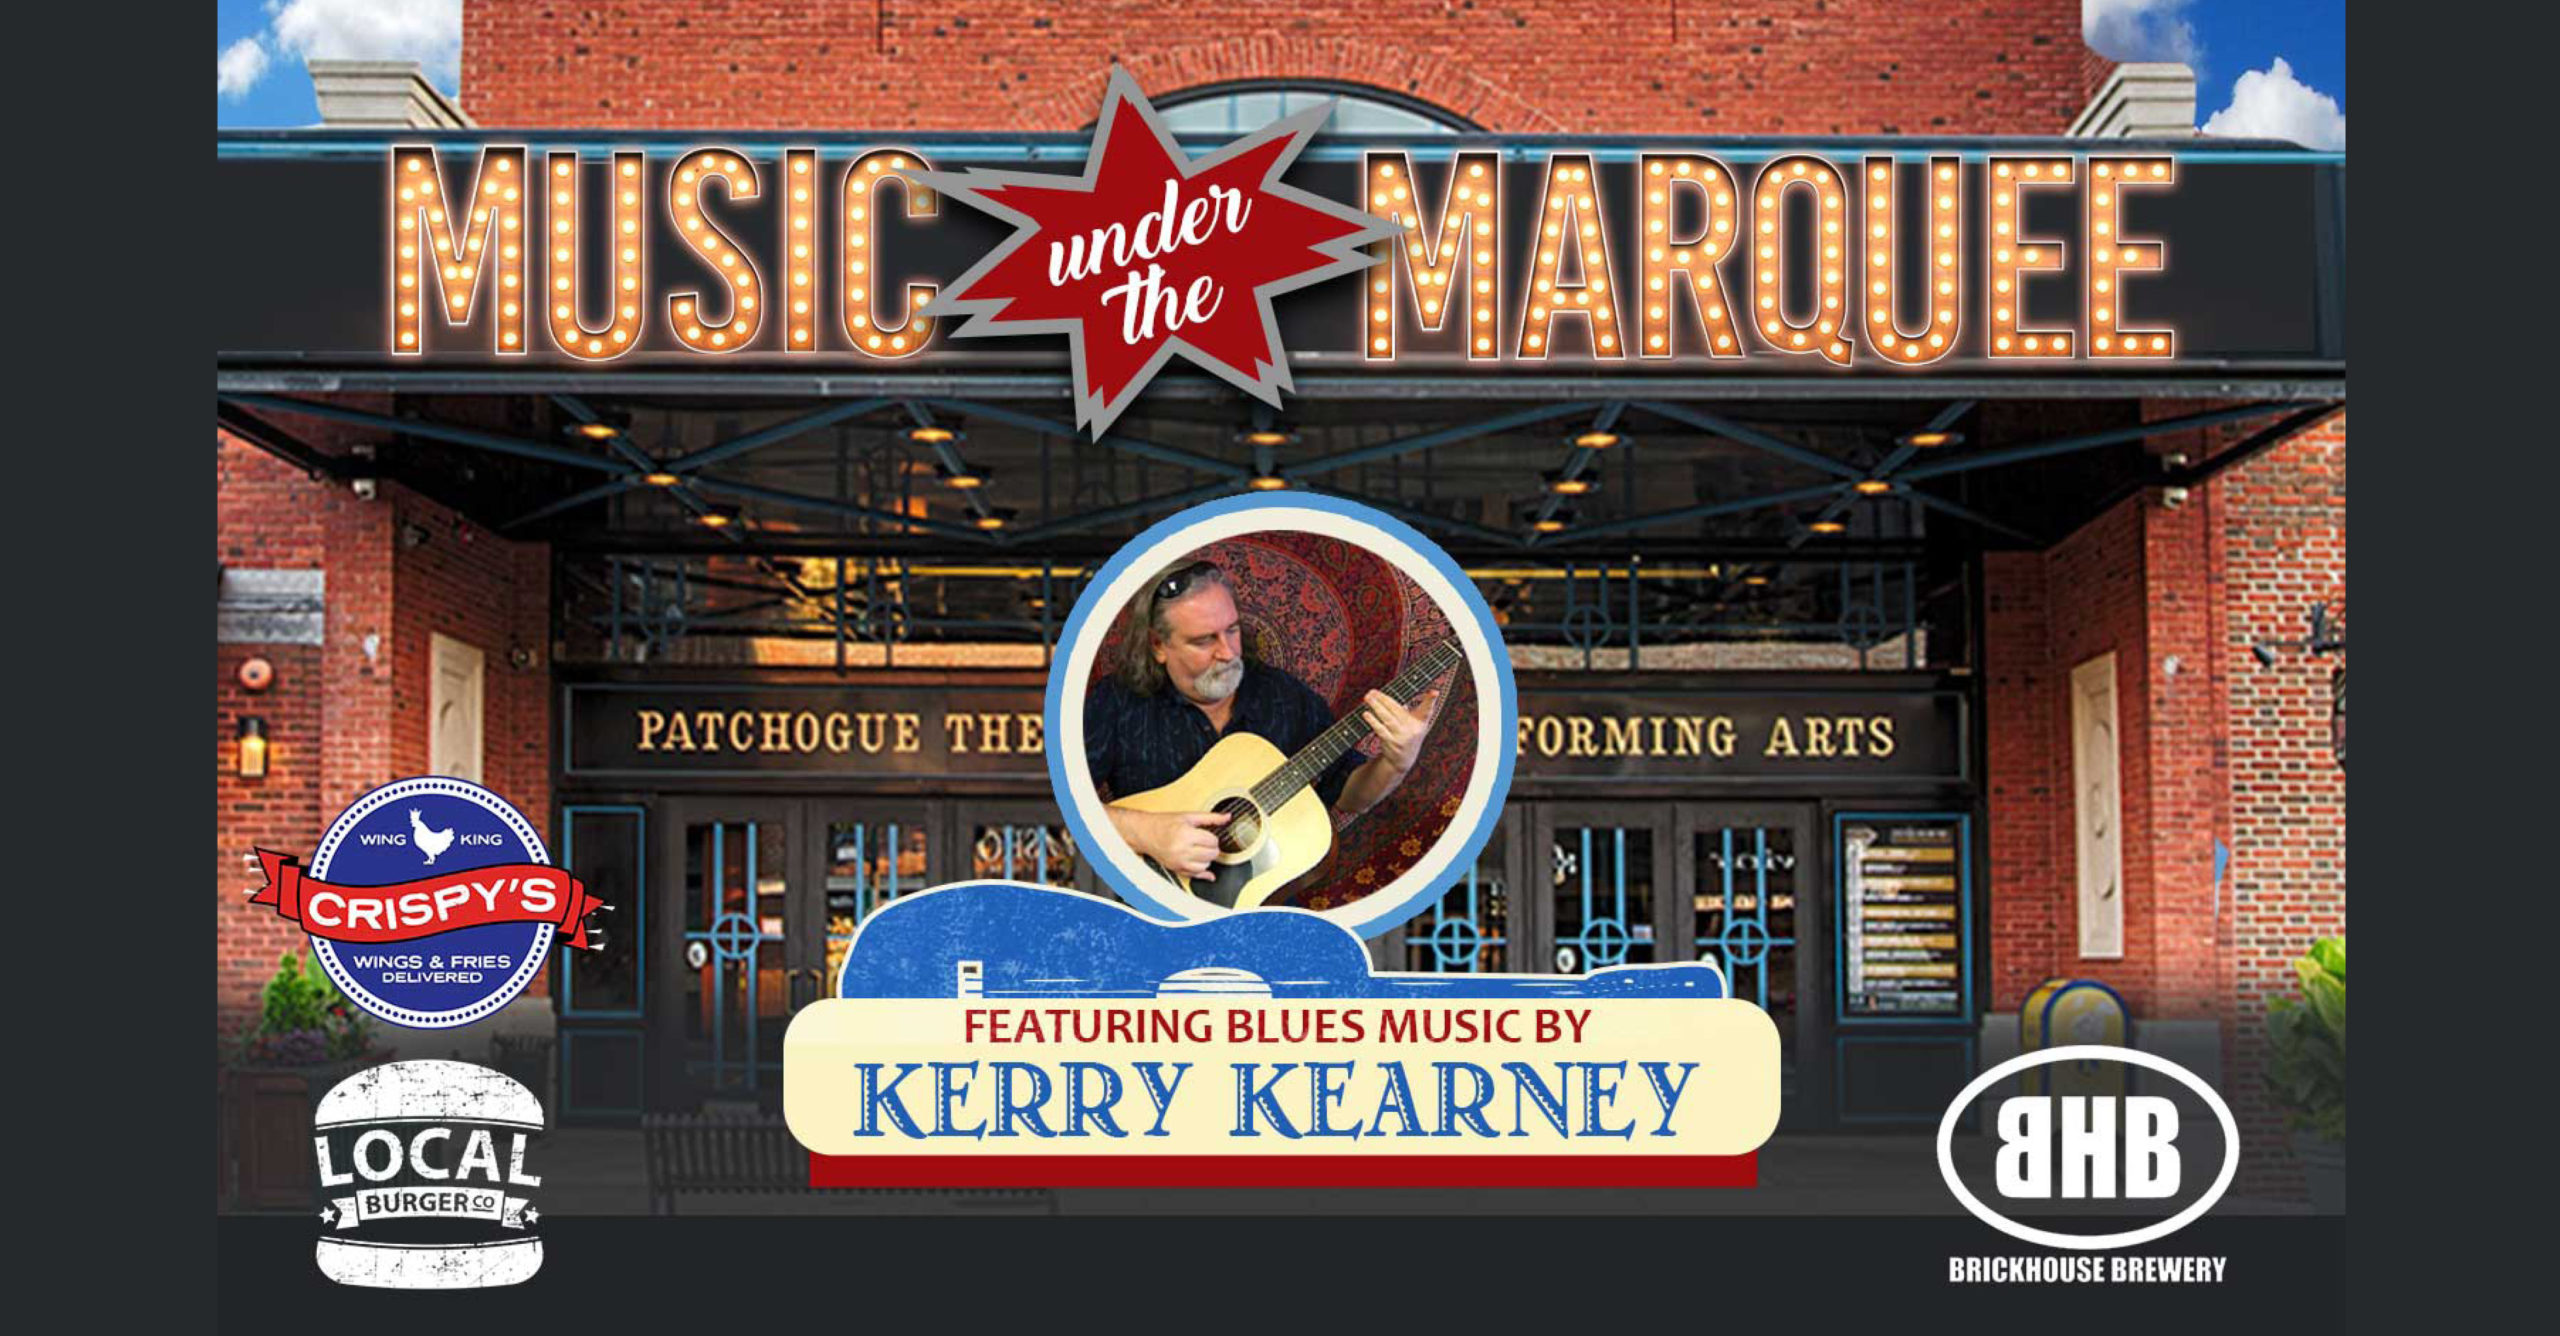 Music Under The Marquee featuring music by Kerry Kearney